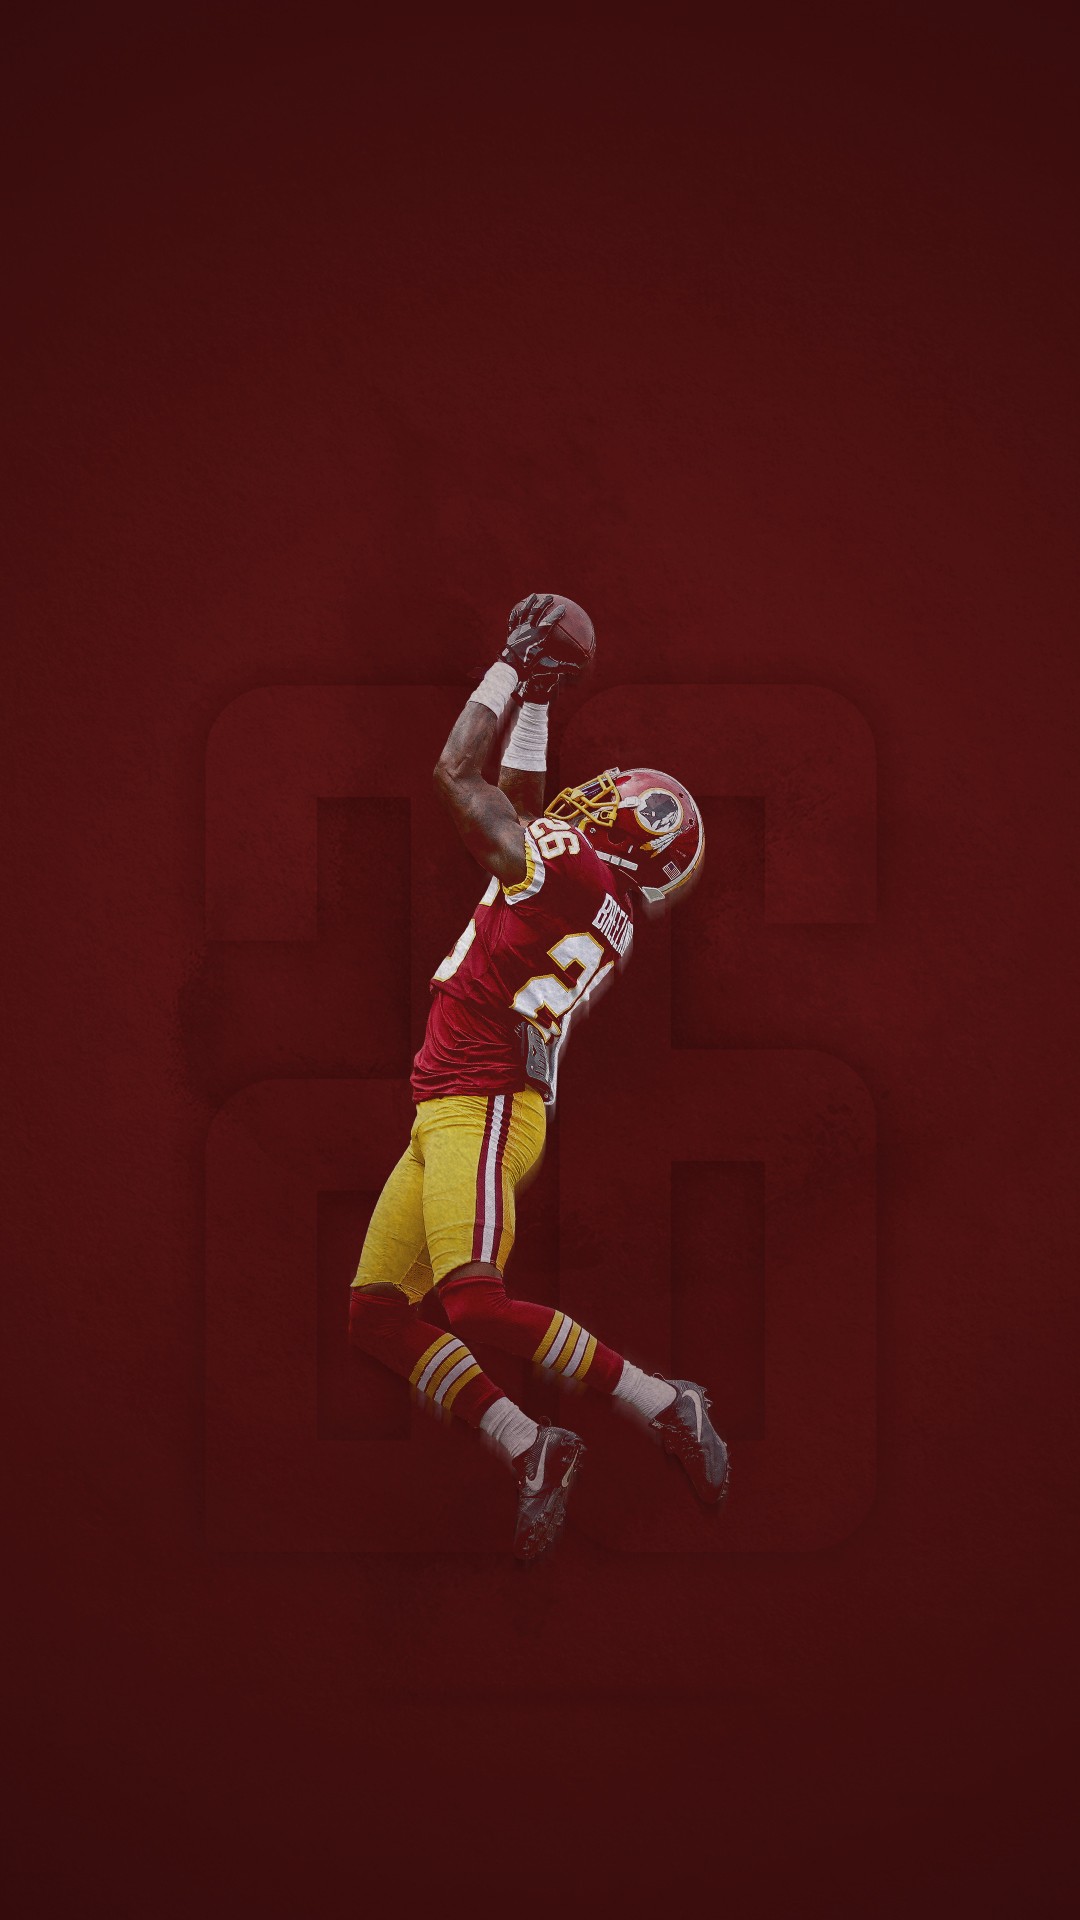 Washington Redskins iPhone Wallpaper High Quality With high-resolution 1080X1920 pixel. Donwload and set as wallpaper for your iPhone X, iPhone XS home screen backgrounds, XS Max, XR, iPhone8 lock screen wallpaper, iPhone 7, 6, SE, and other mobile devices